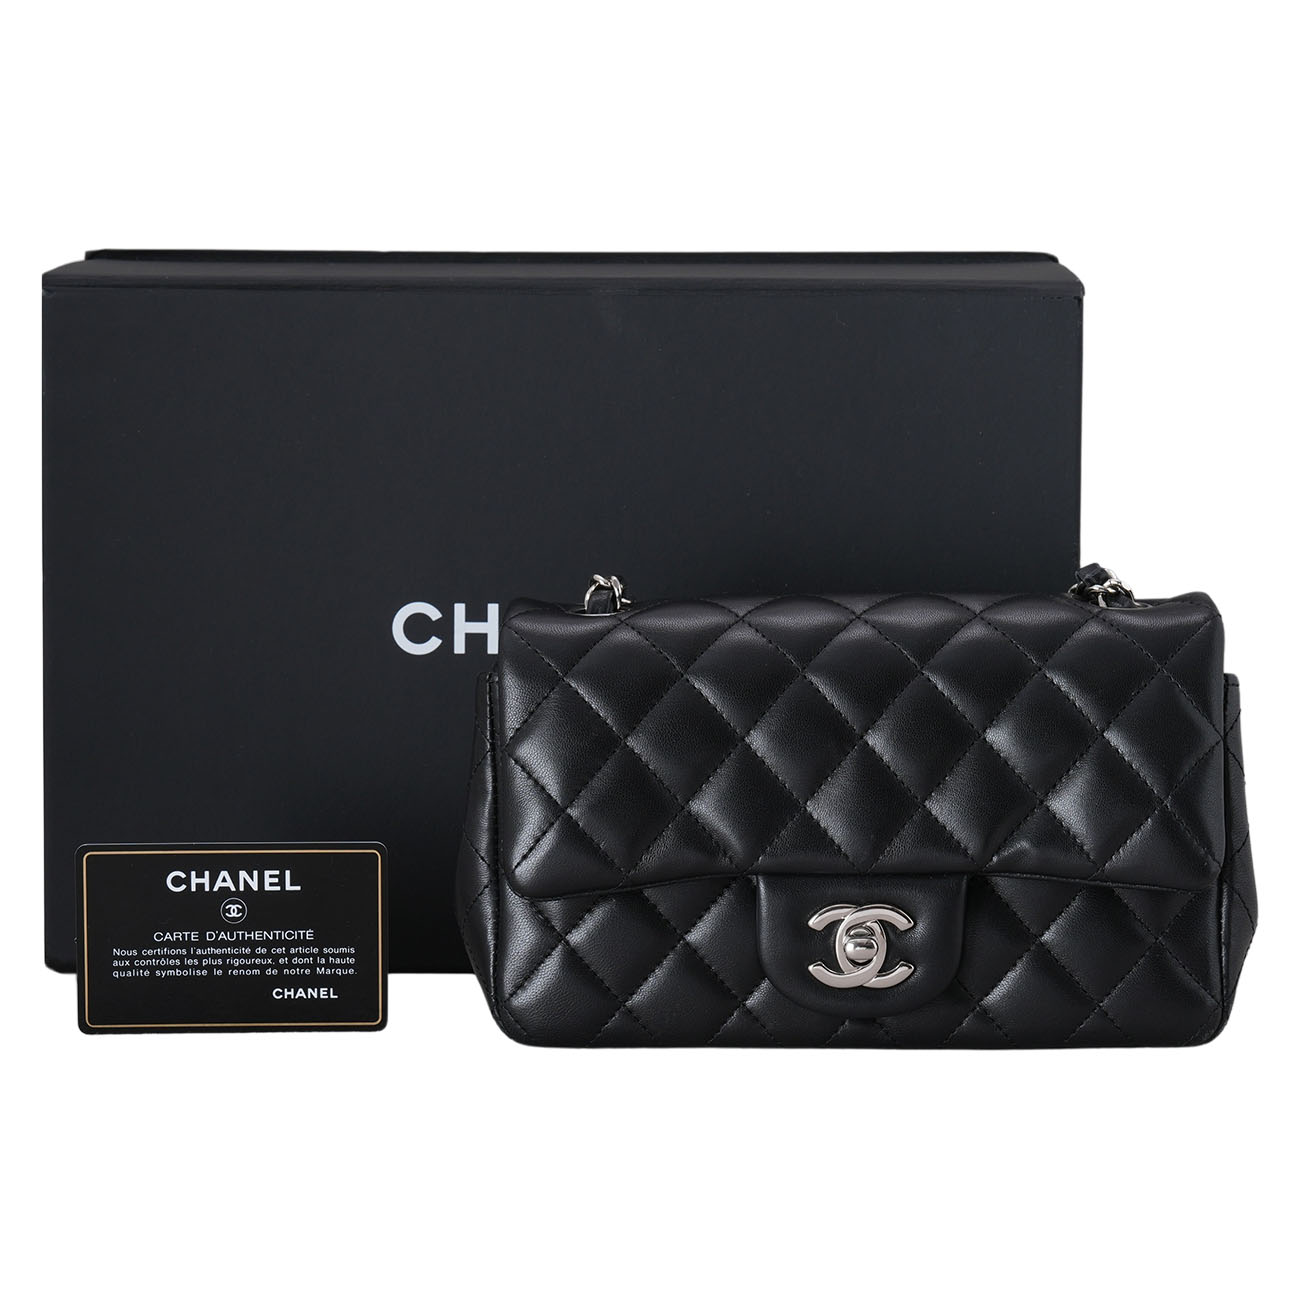 CHANEL(USED)샤넬 램스킨 클래식 뉴미니 크로스백